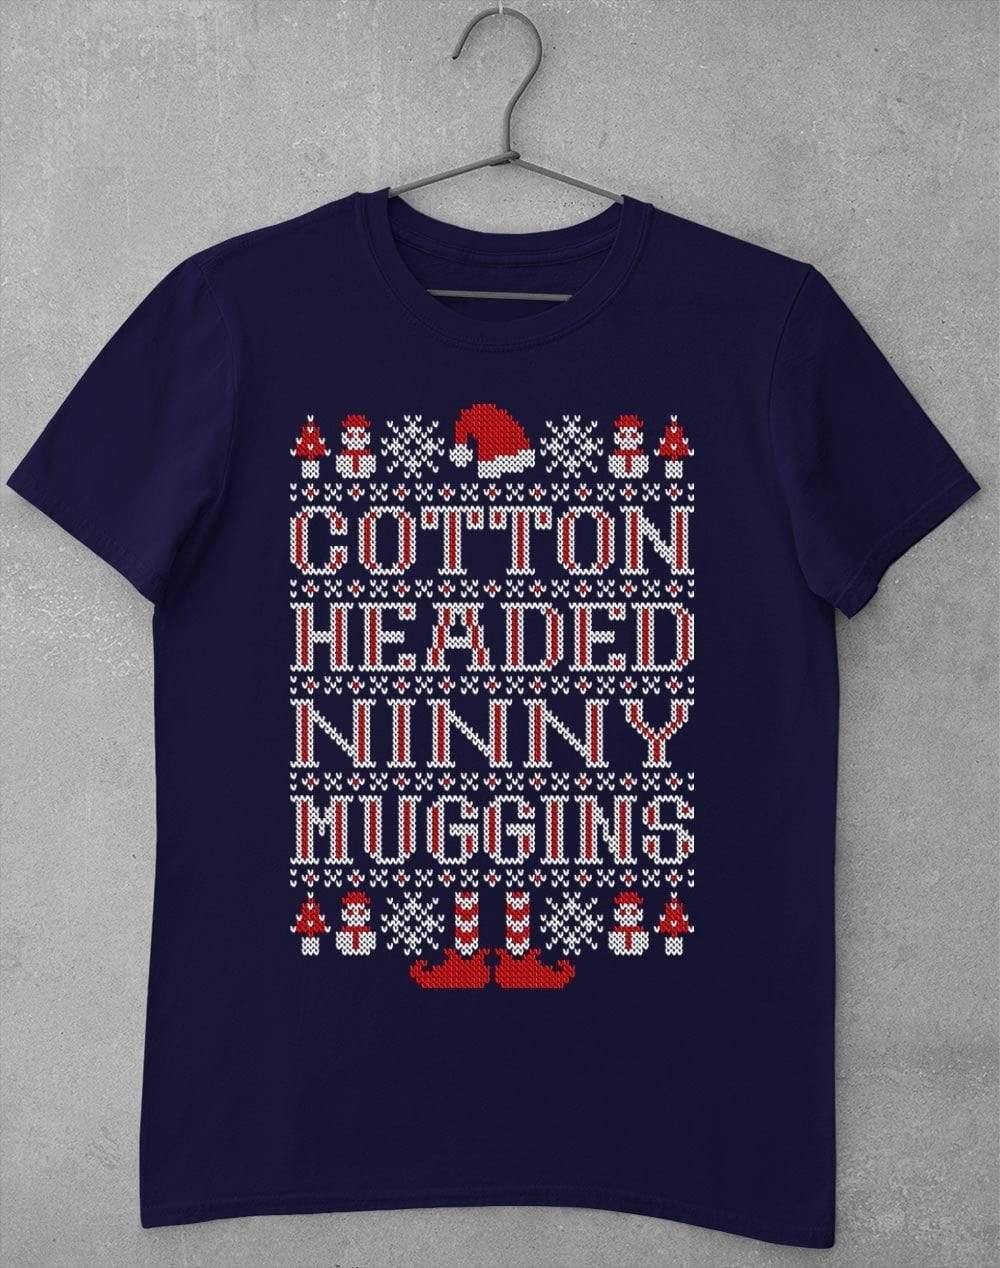 Cotton Headed Ninny Muggins Festive Knitted-Look T-Shirt S / Navy  - Off World Tees